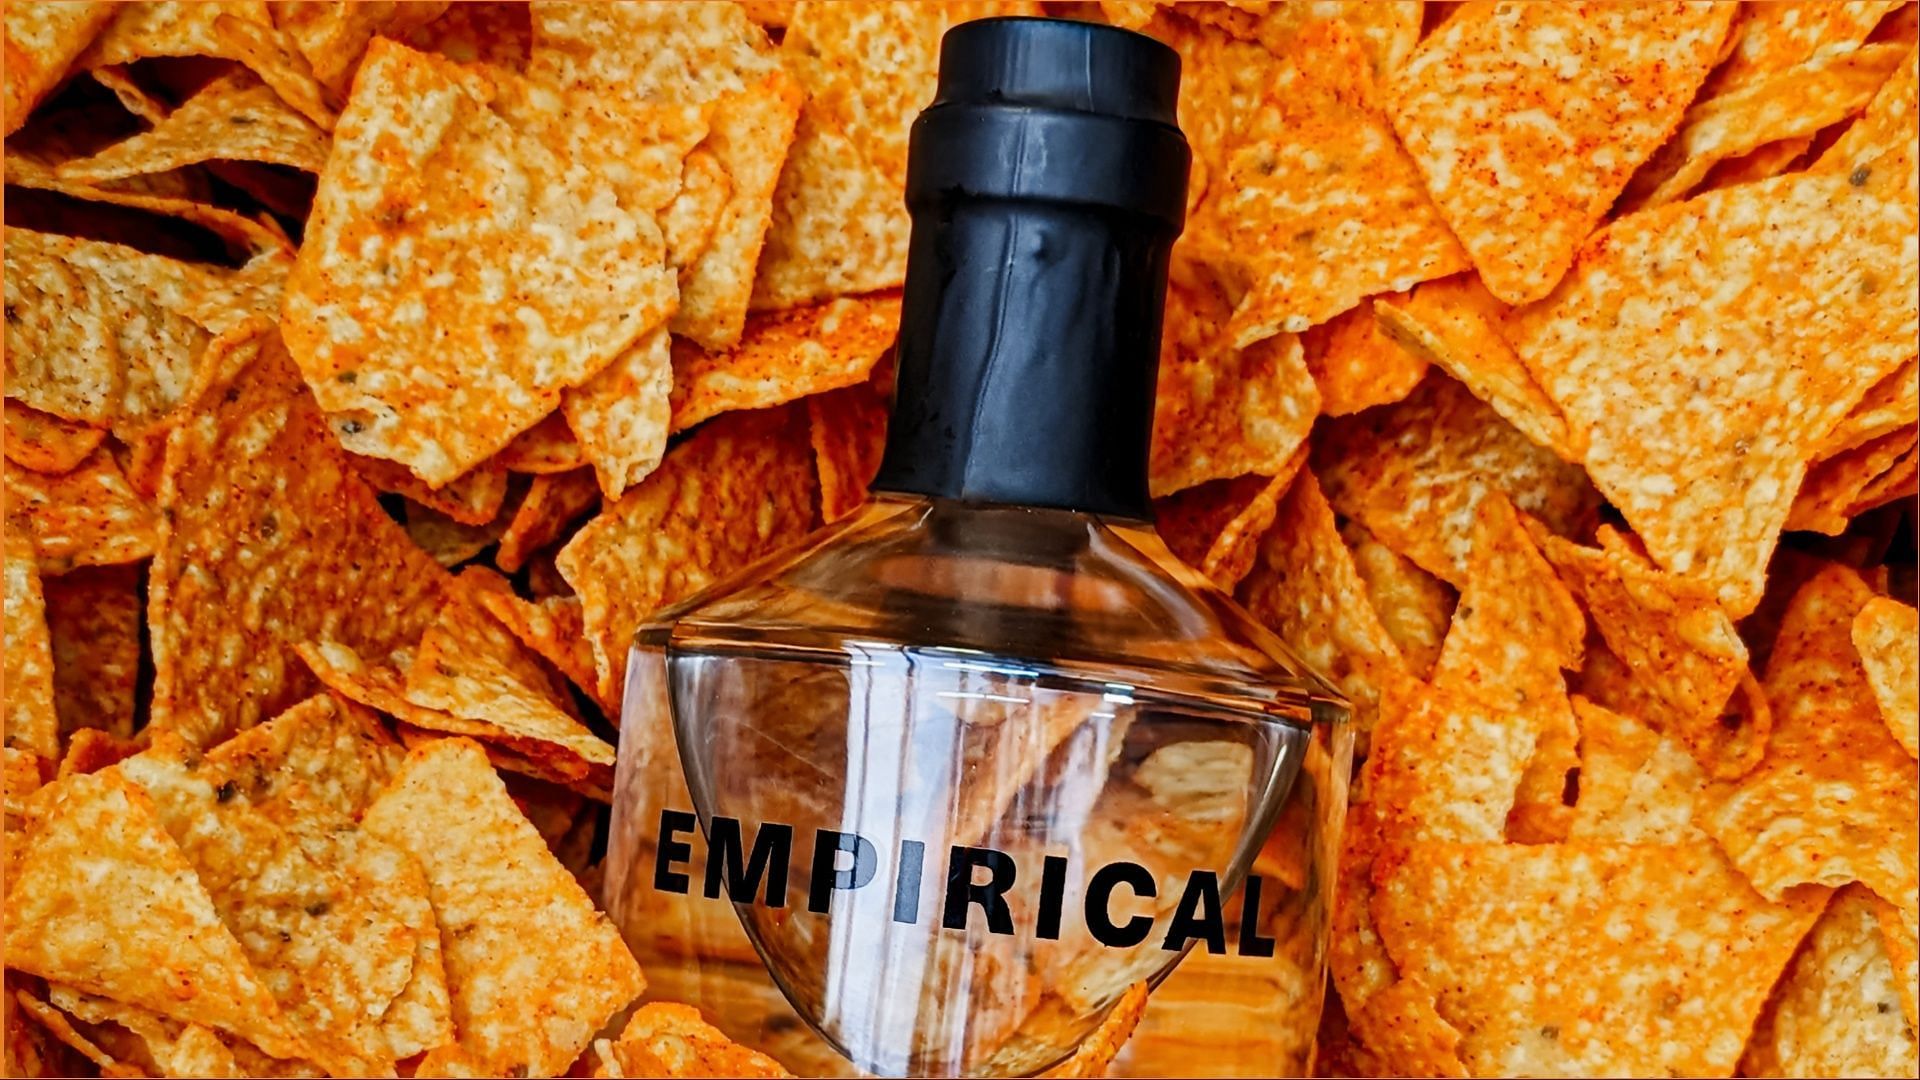 The new Empirical Nacho Cheese Spirit is available for pre-order starting December 13 (Image via Empirical)